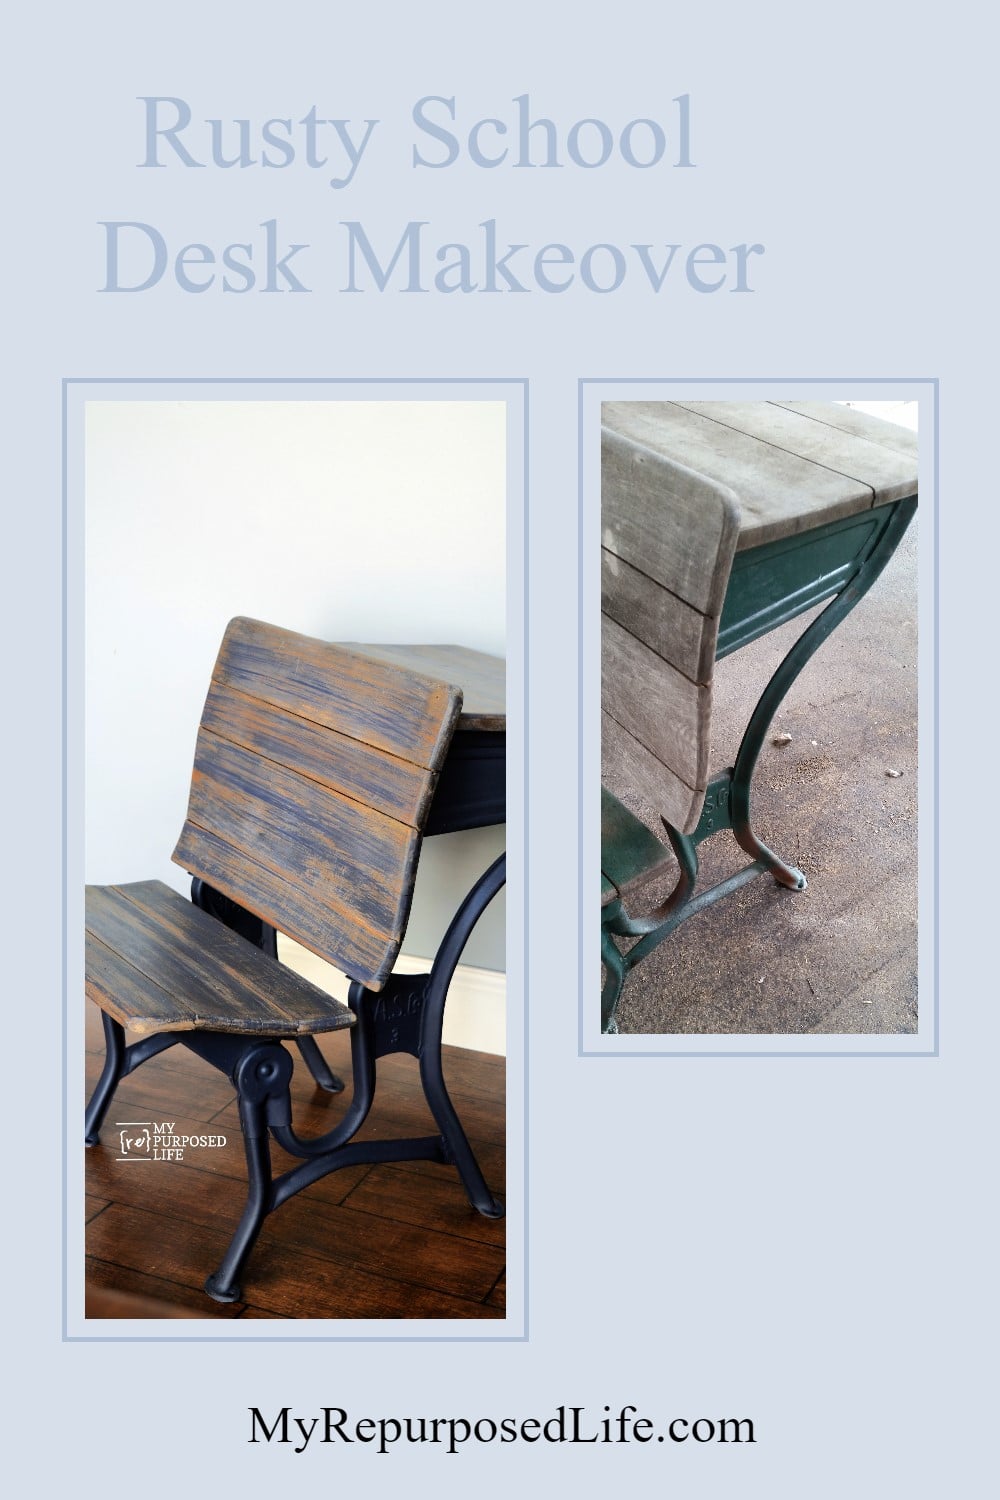 Some projects can be more challenging than others, as is the case with this antique school desk makeover. Dealing with rust that has been painted is tough. #MyRepurposedLife #repurposed #antique #schooldesk #makeover via @repurposedlife